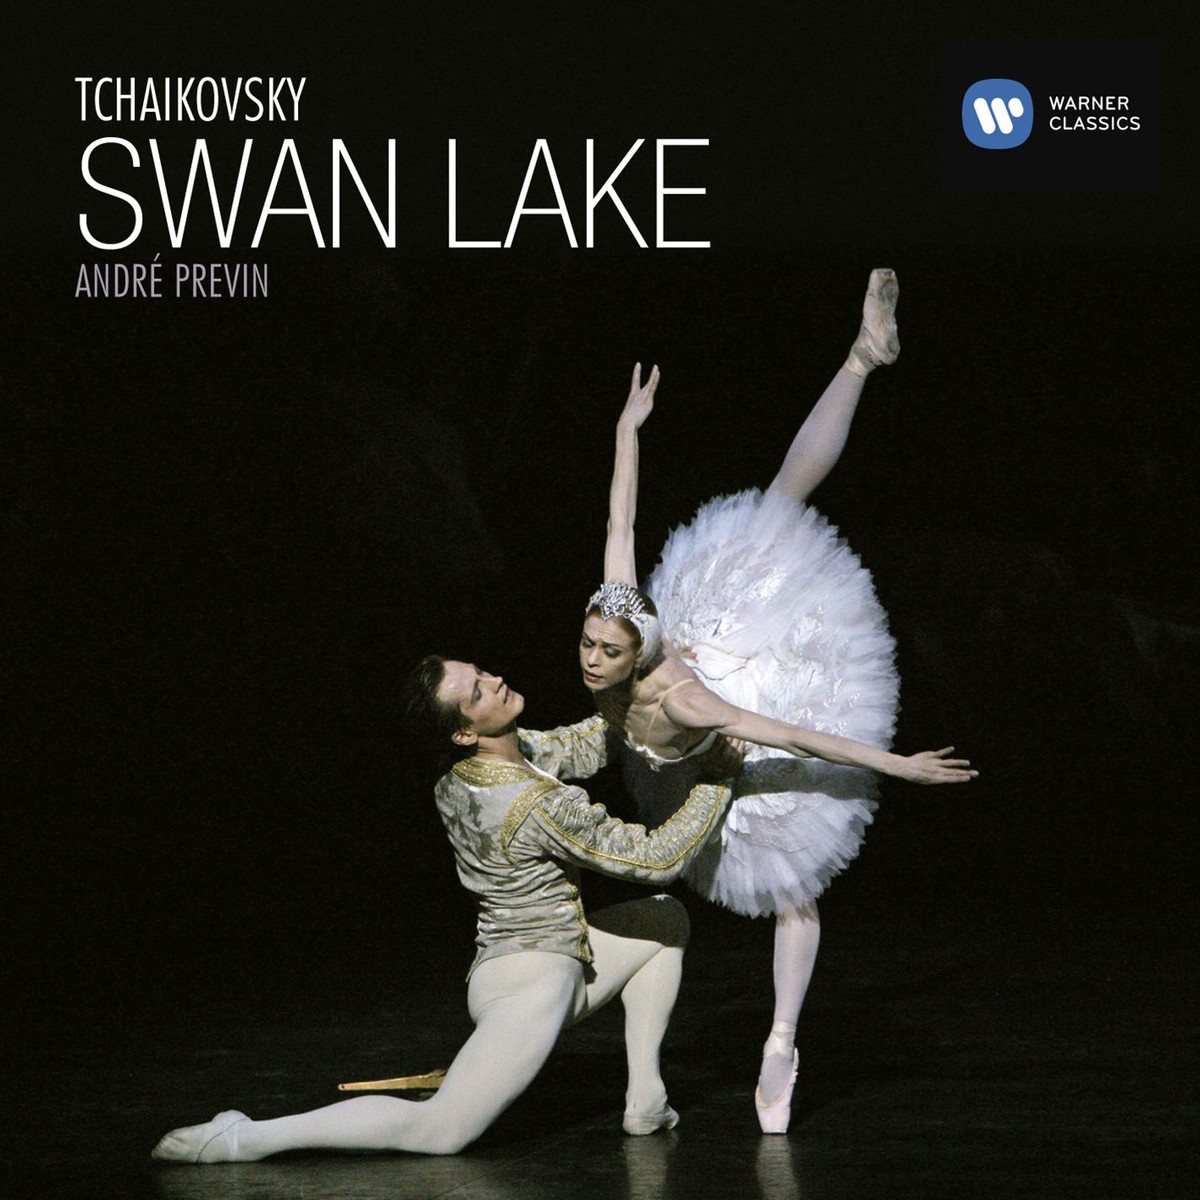 Swan Lake - Ballet in four acts Op. 20, Act III, Pas de deux (additional number): Variation I (Allegro moderato)